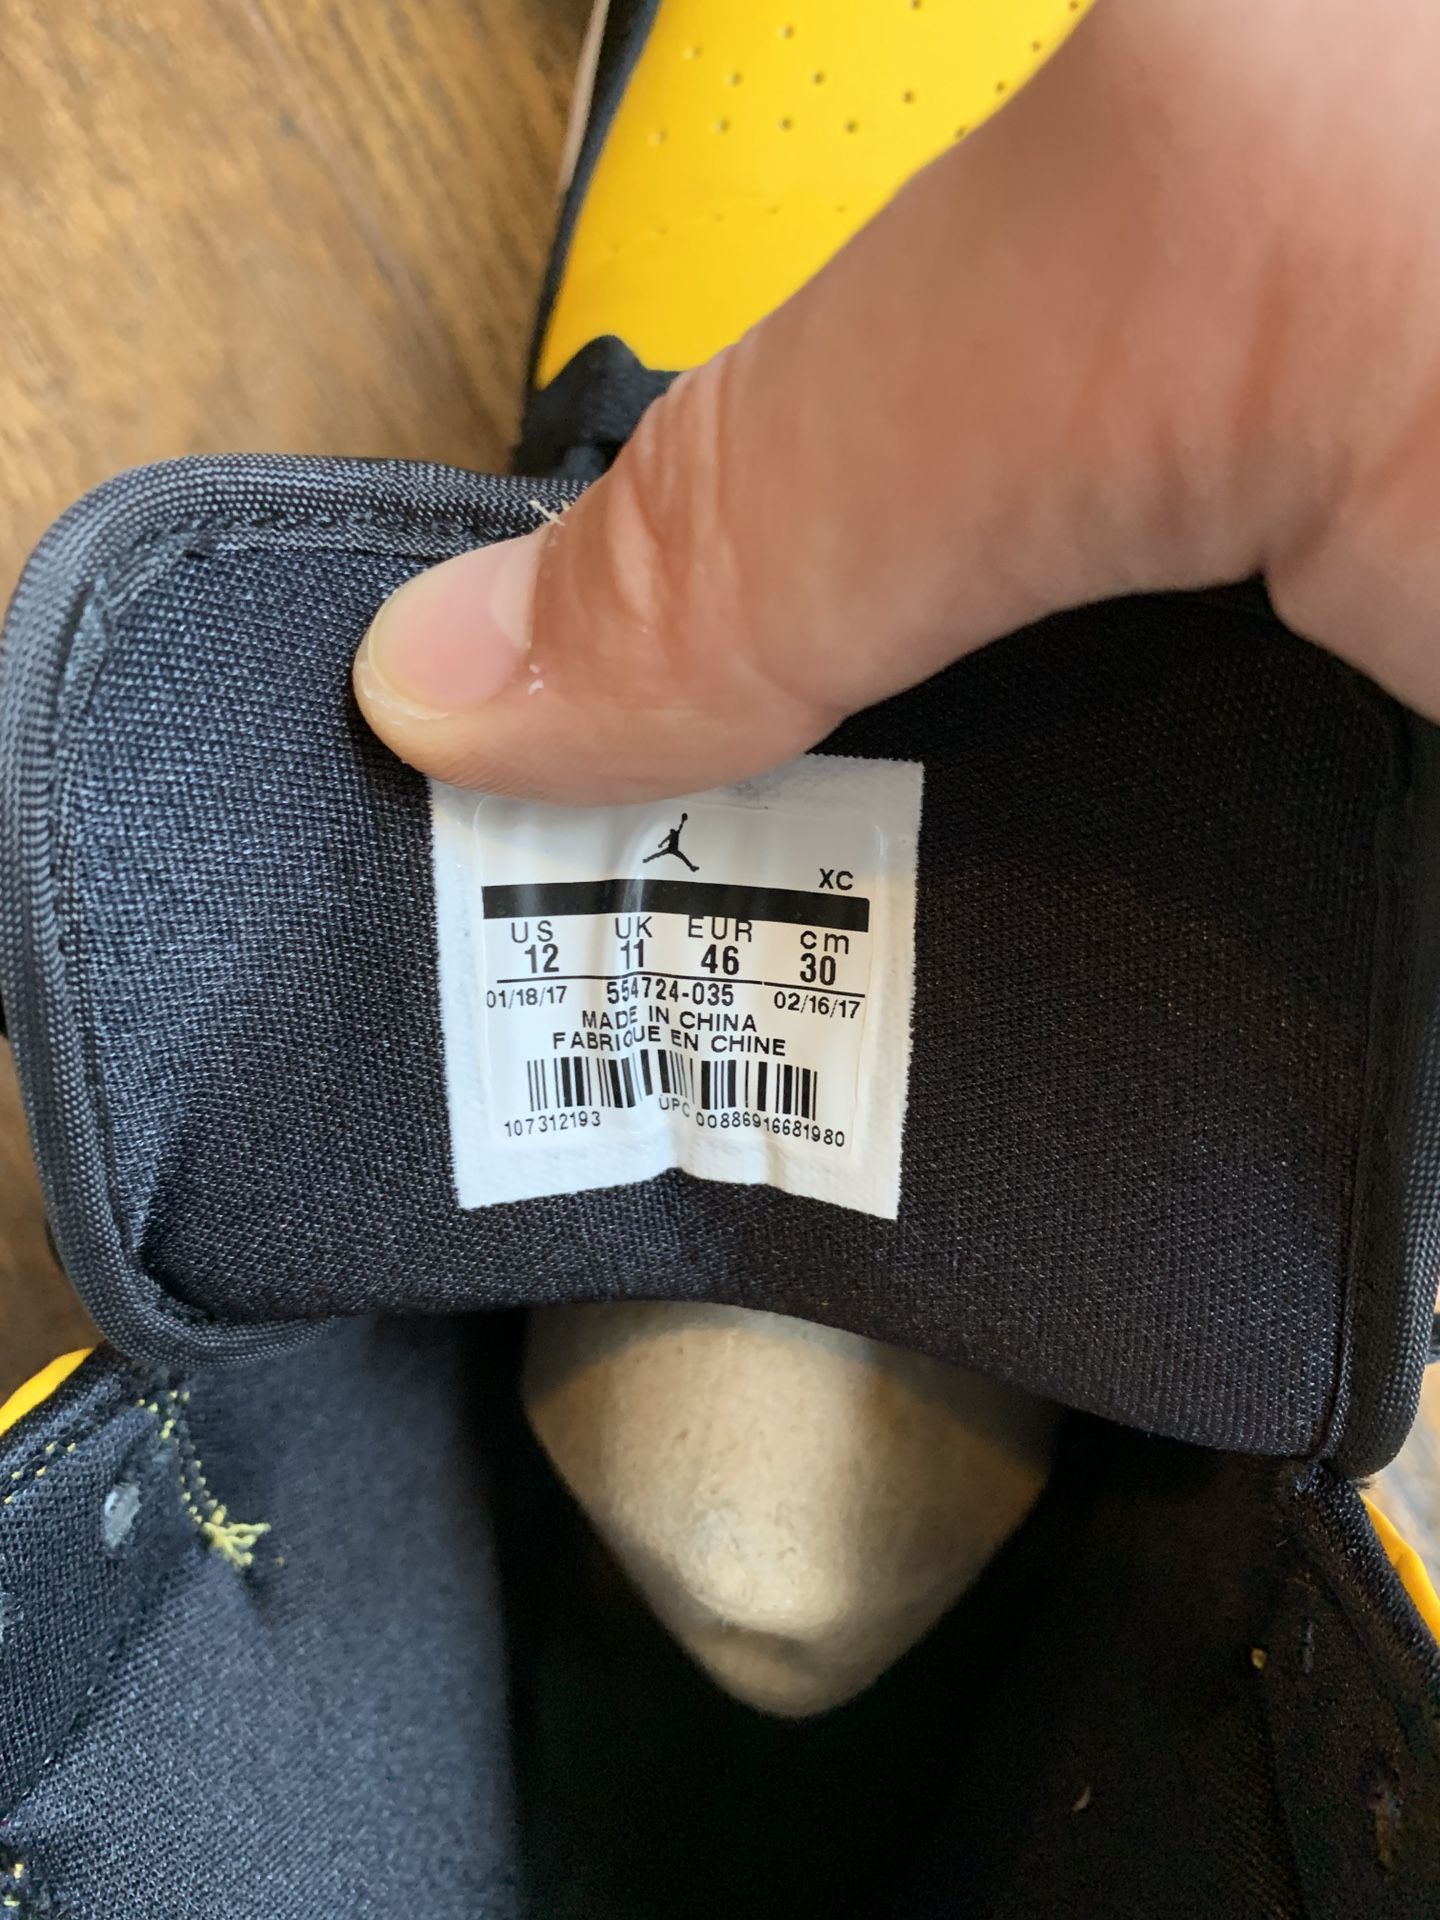 Jordan 1’s Black & Yellow size 12 for Sale in Lake Worth, FL - OfferUp